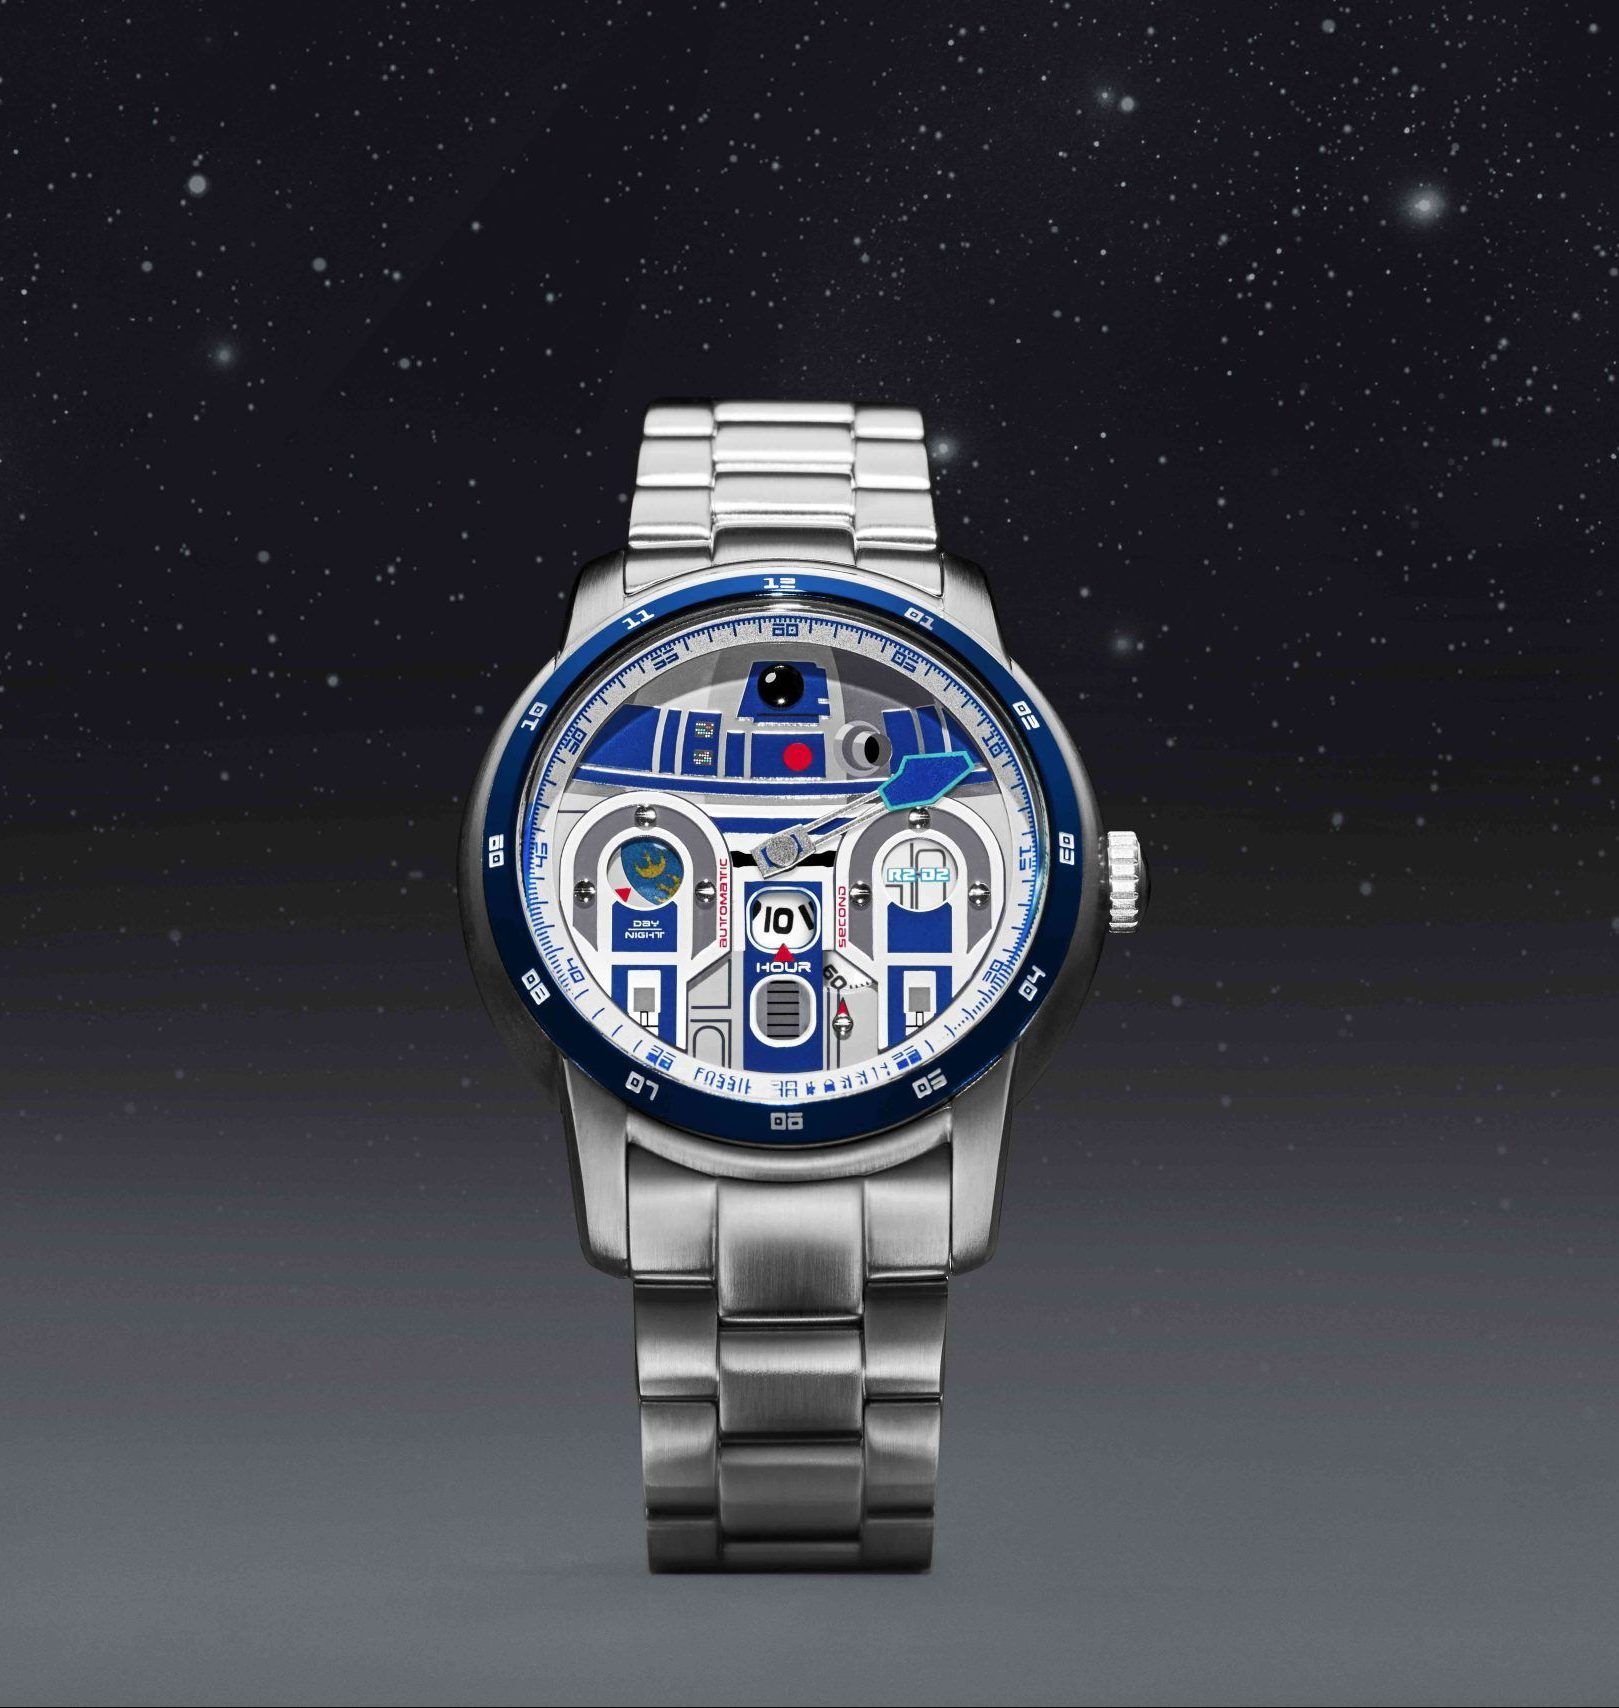 What We Know About The New Fossil Star Wars Watches